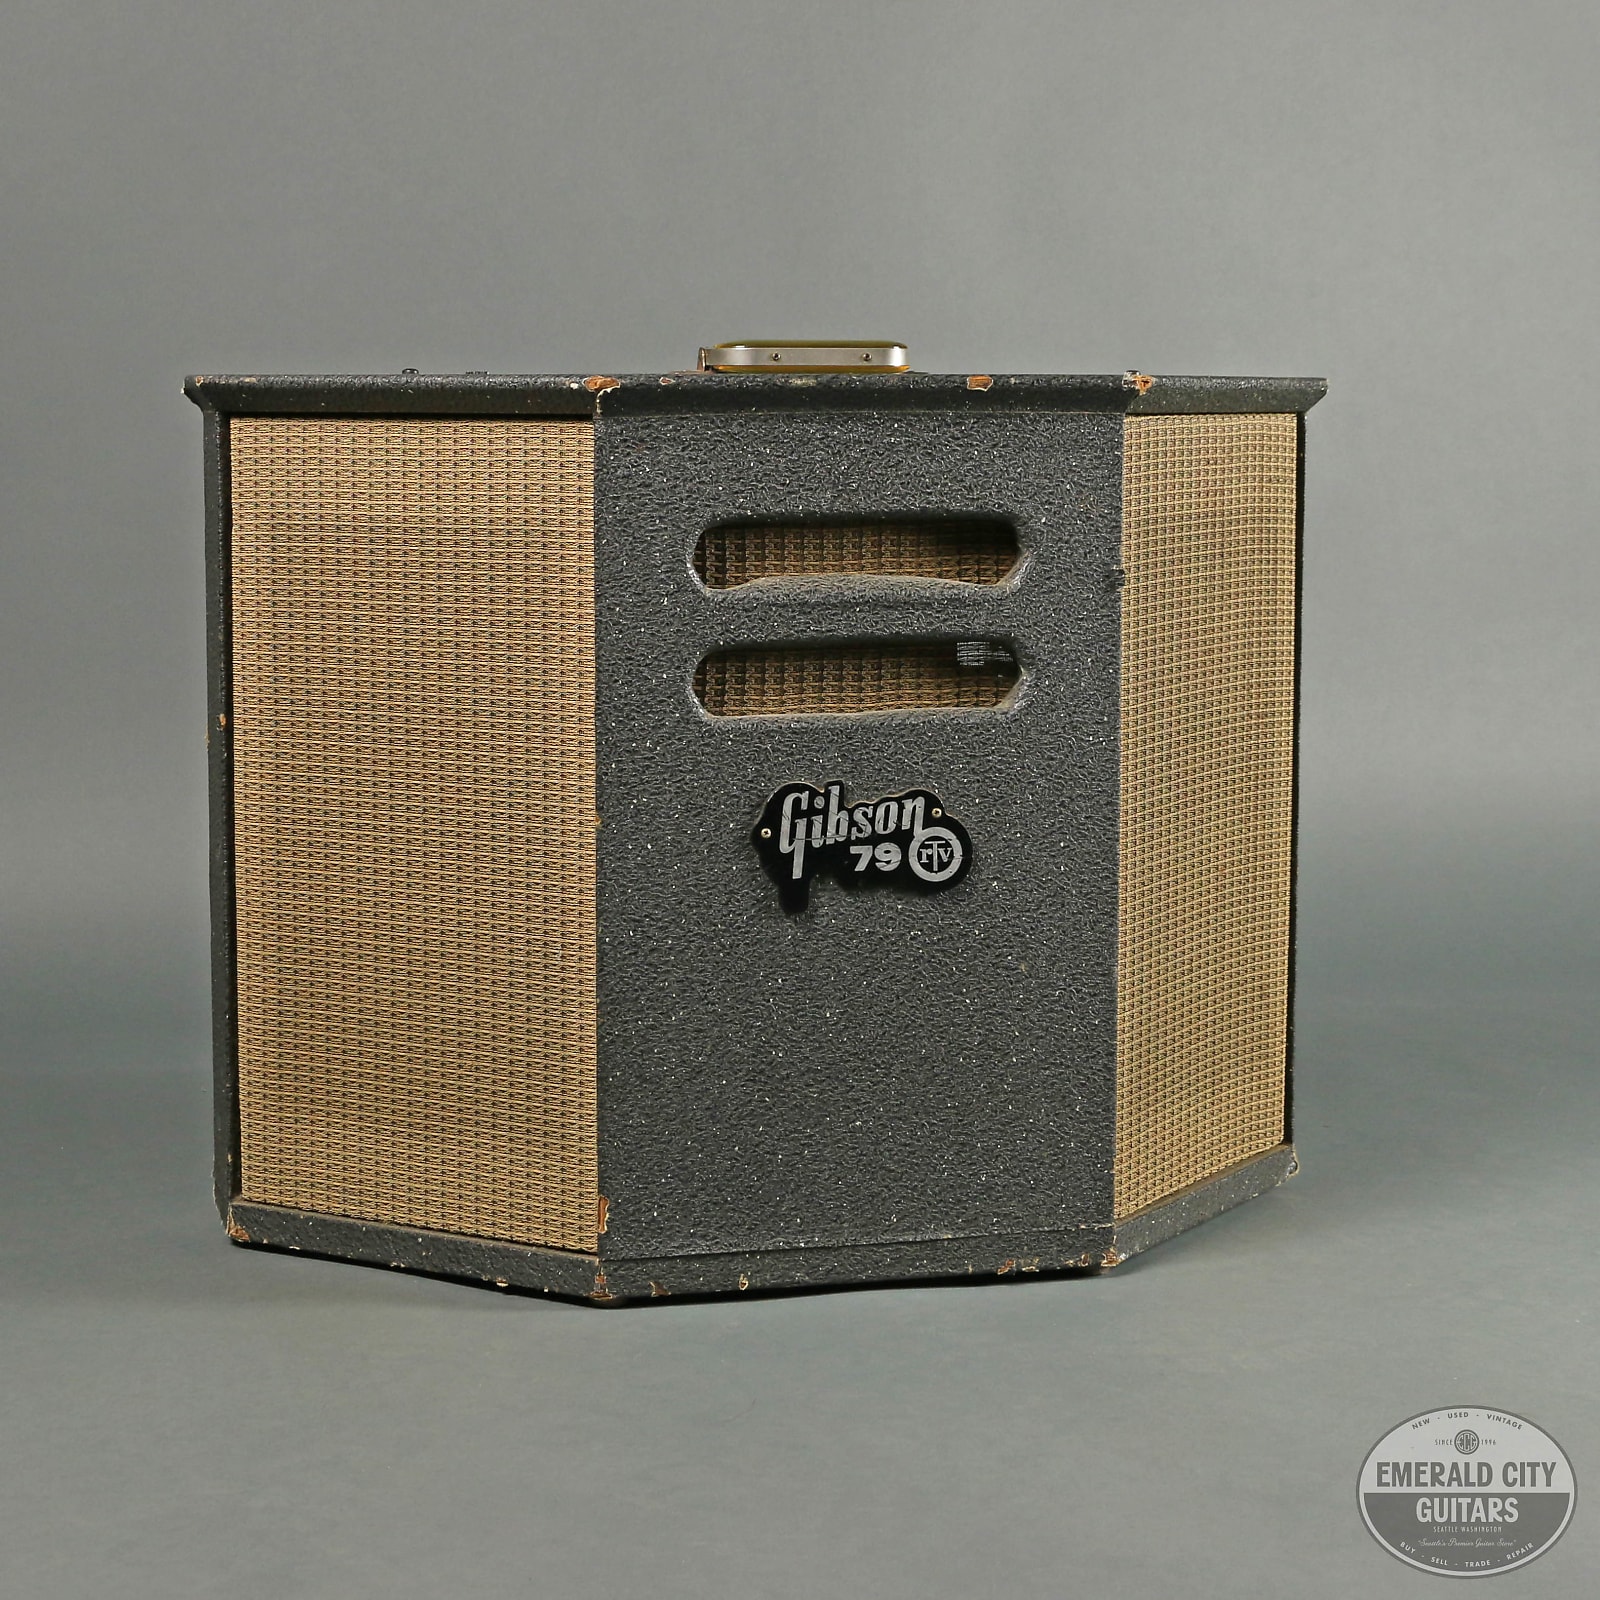 A Gibson GA-79RVT Stereo Amp, formerly owned by Walter Becker.